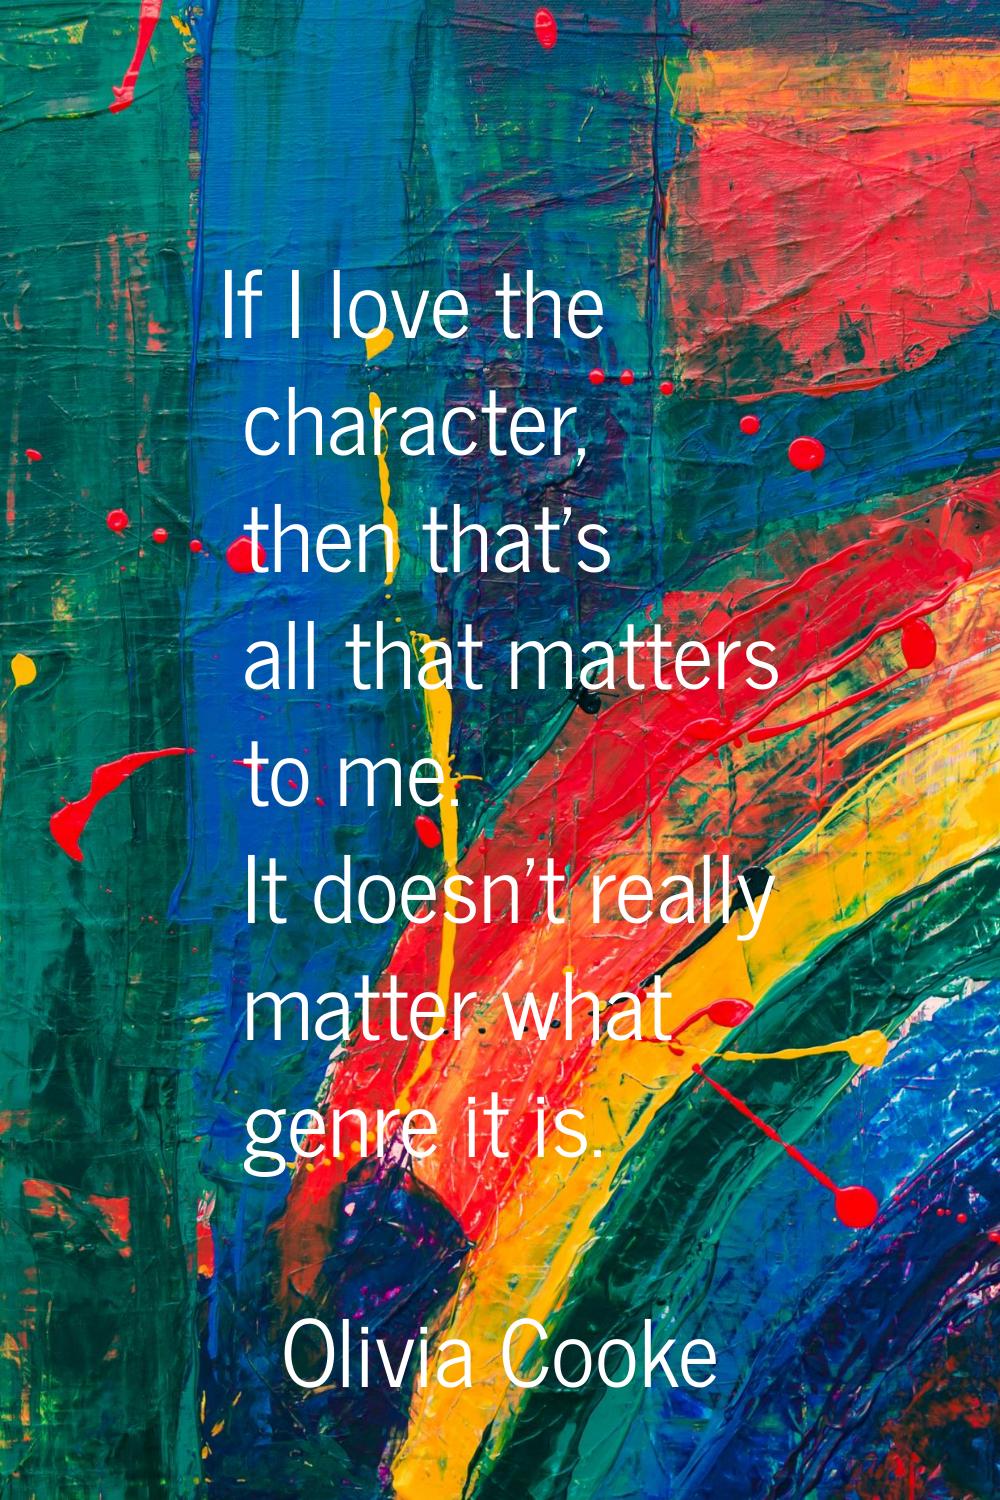 If I love the character, then that's all that matters to me. It doesn't really matter what genre it